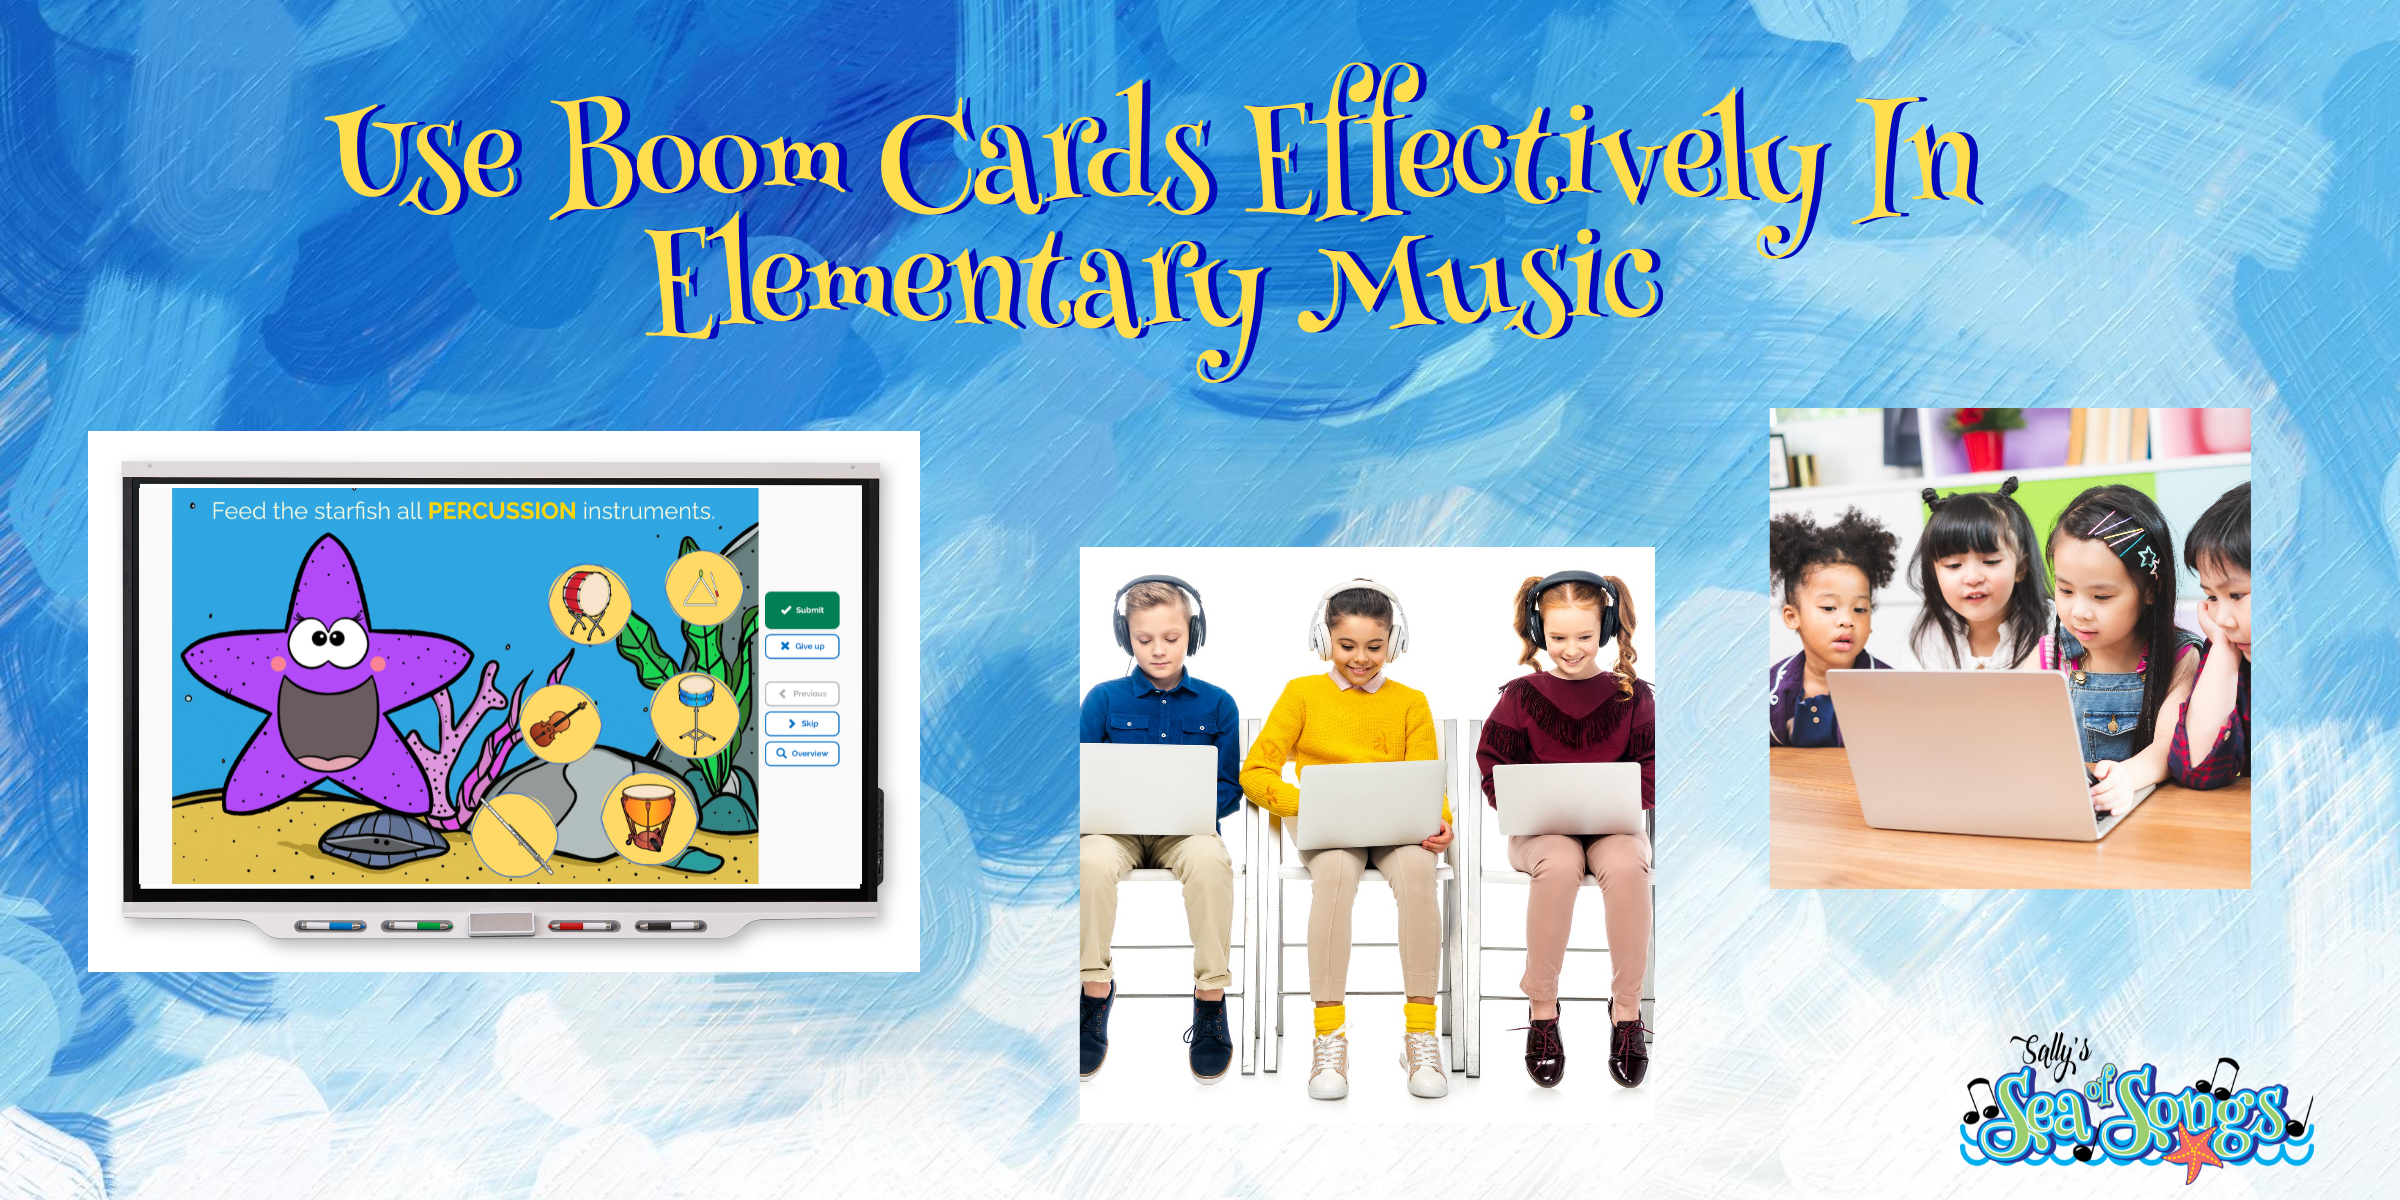 Practical Ways to Use Boom Cards Effectively in Elementary Music